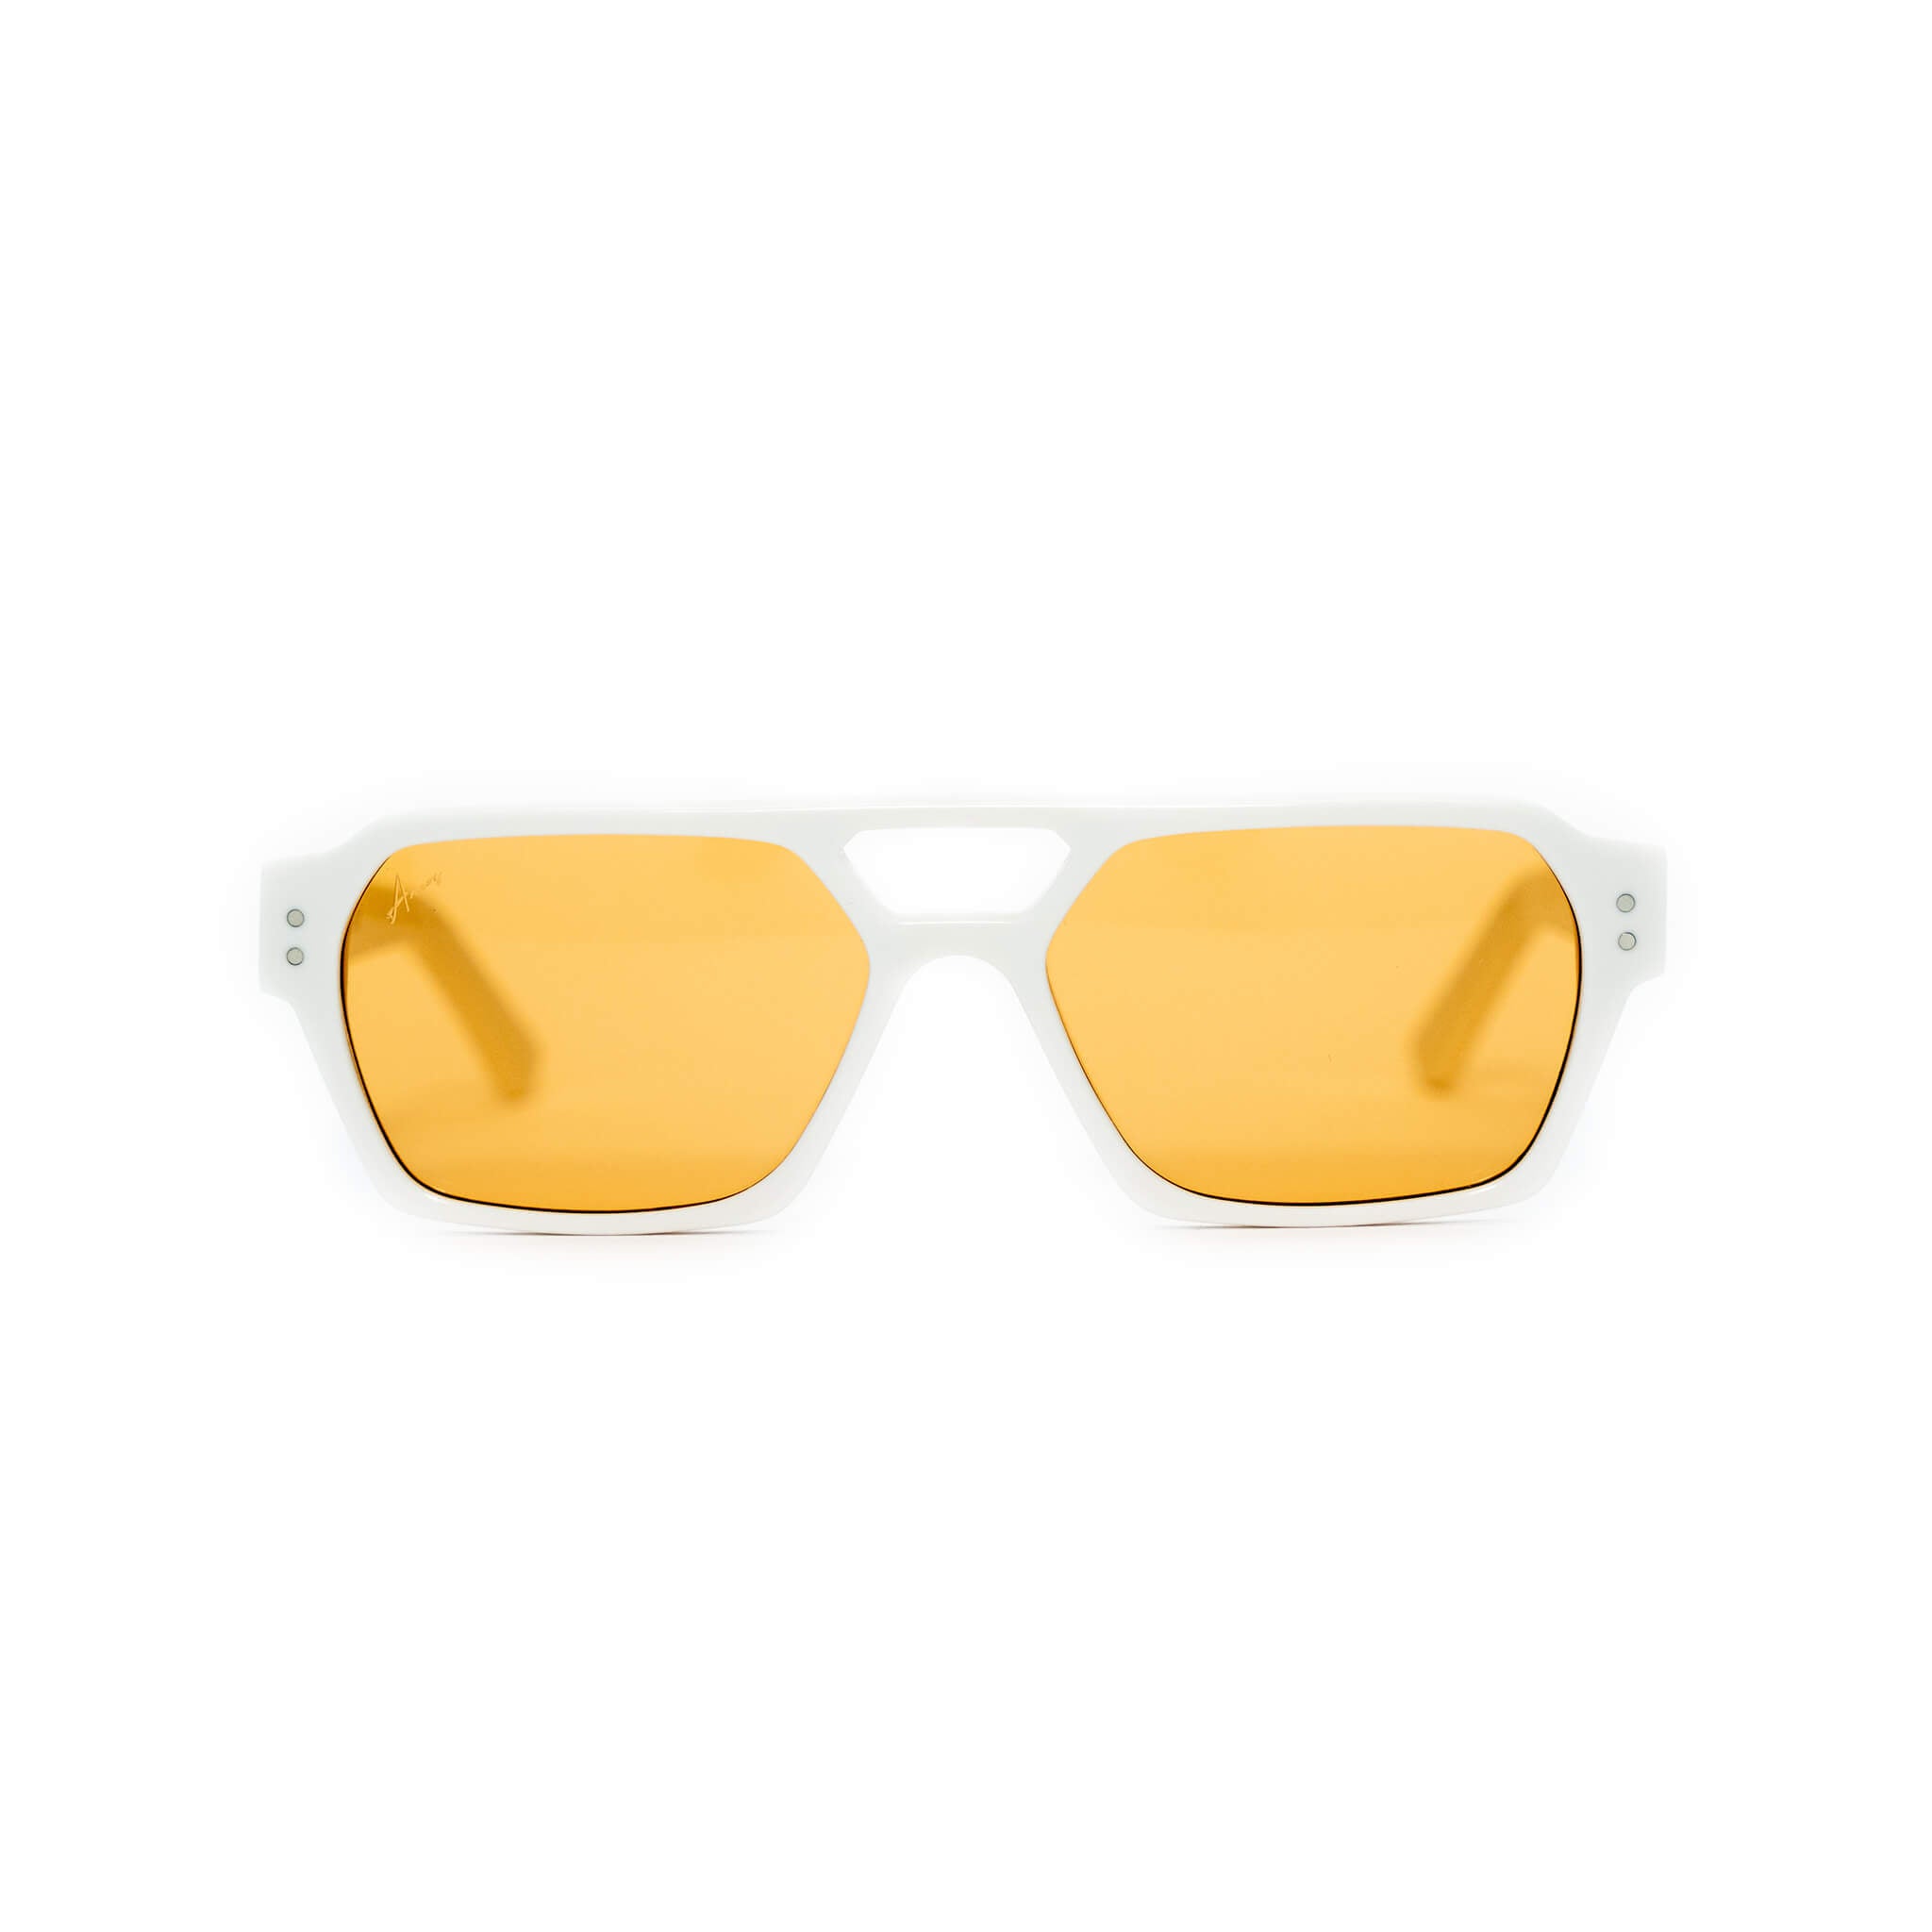 Ego sunglasses in white and orange from Ameos